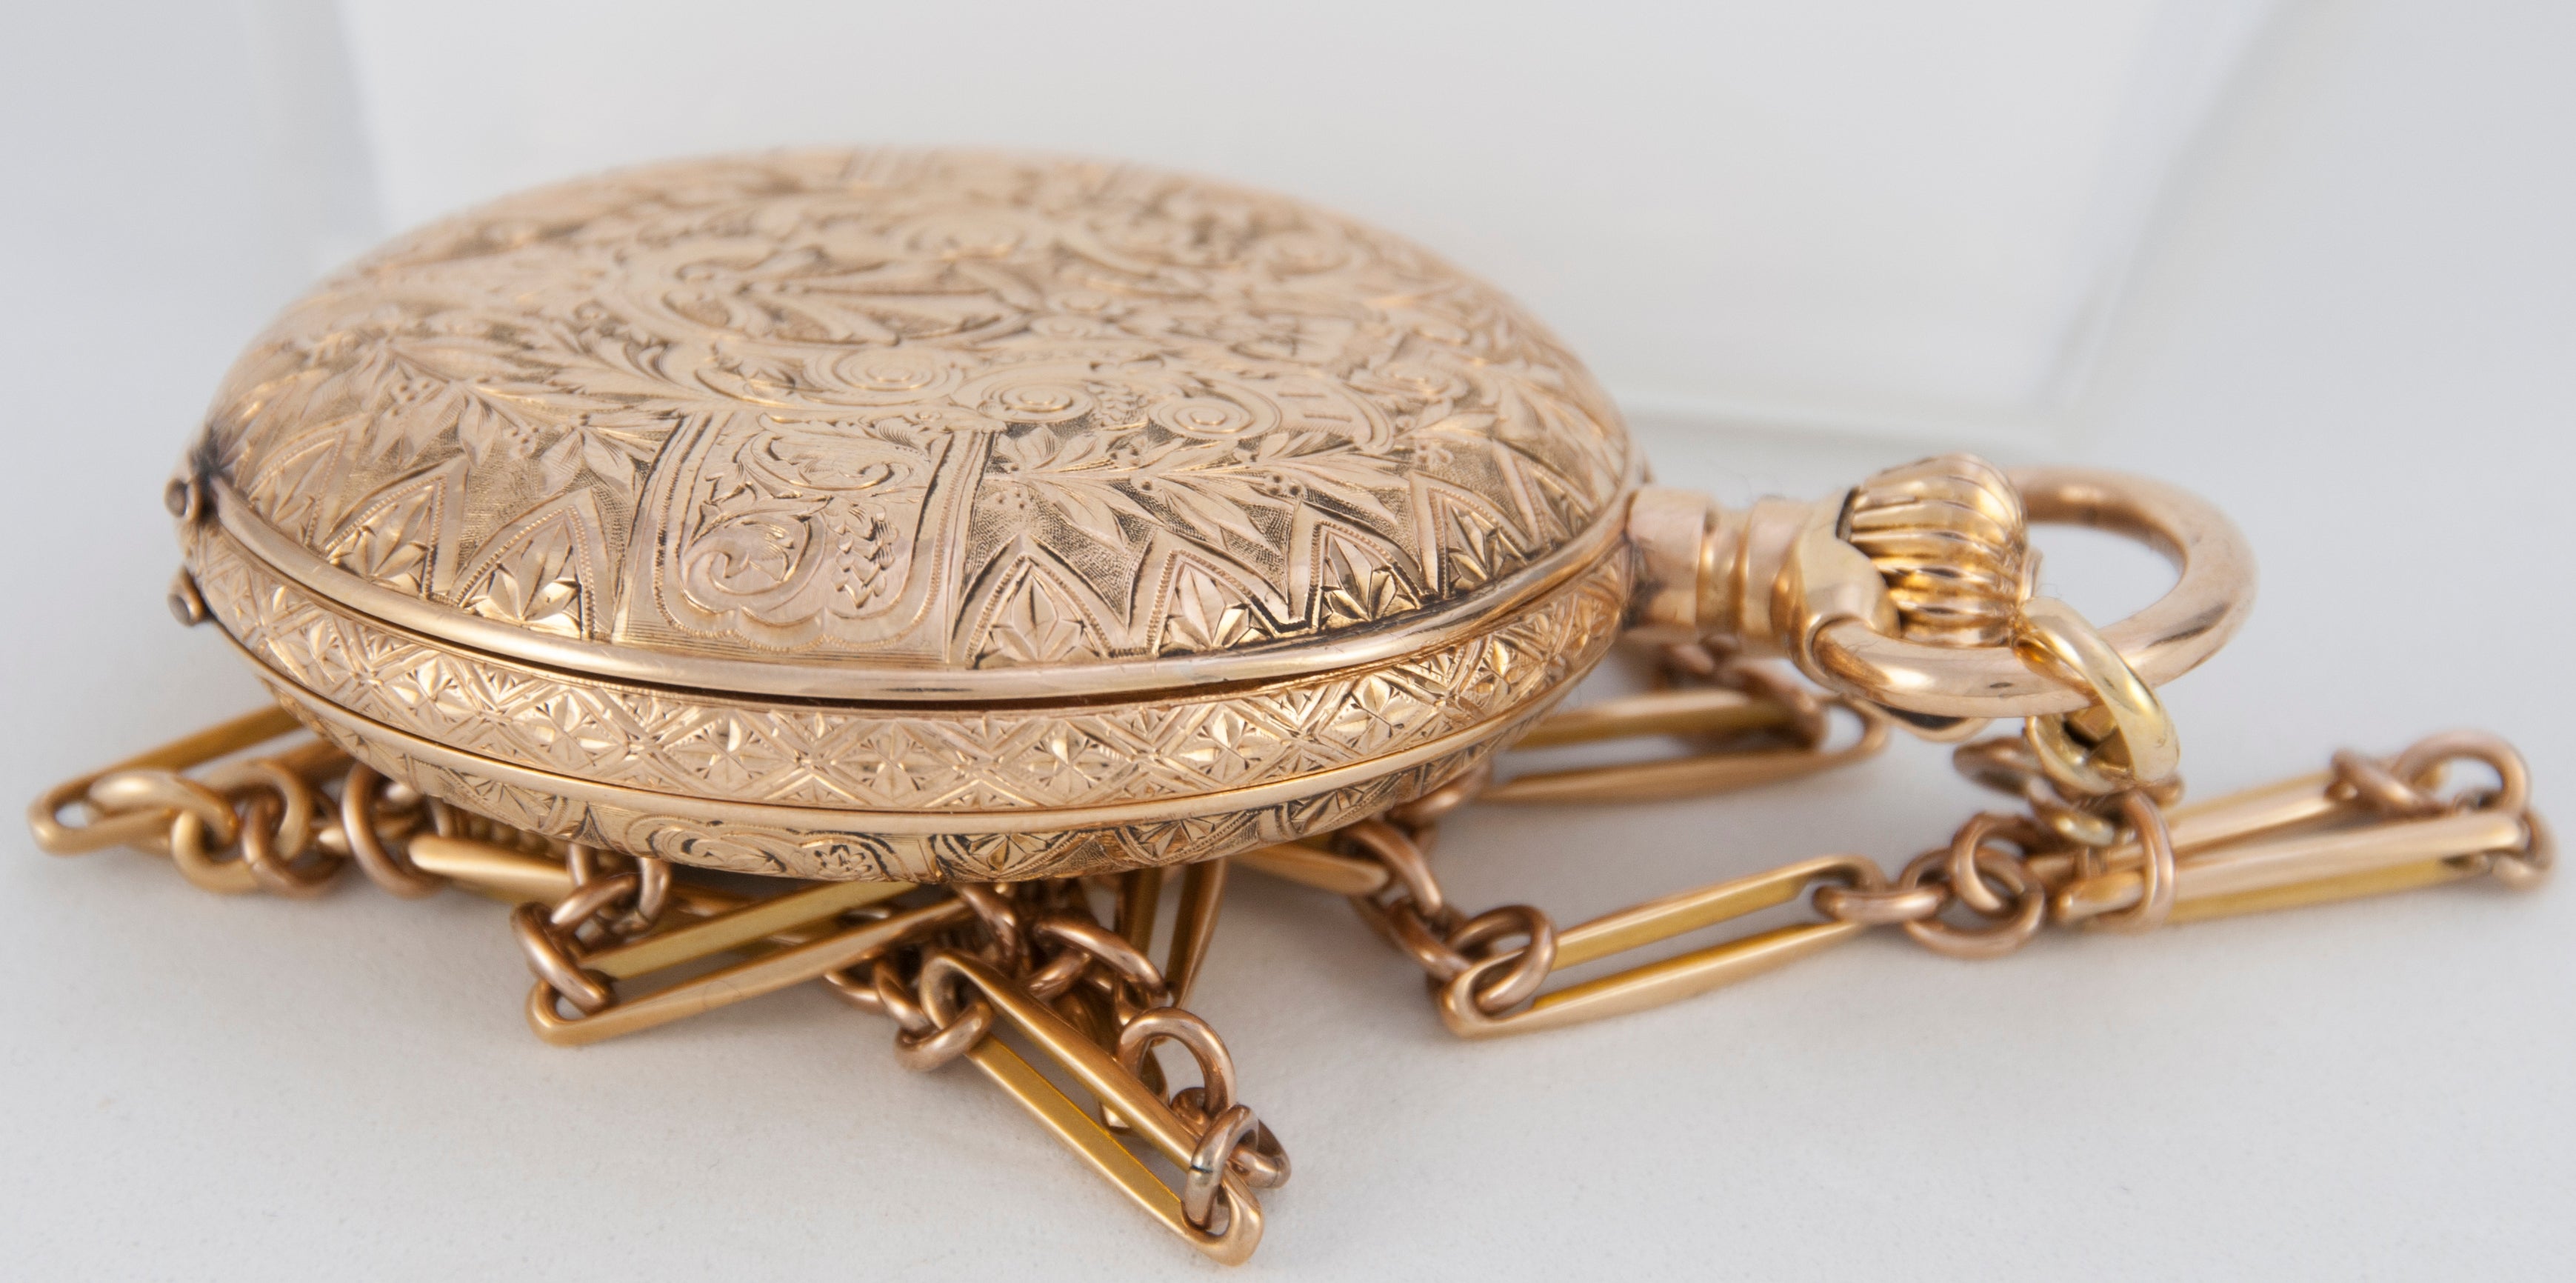 C.J & A.Perrenoud & Cie Pocket Watch Yellow Gold 18k - Circa 1885 - WATCH CHAIN NOT INCLUDED